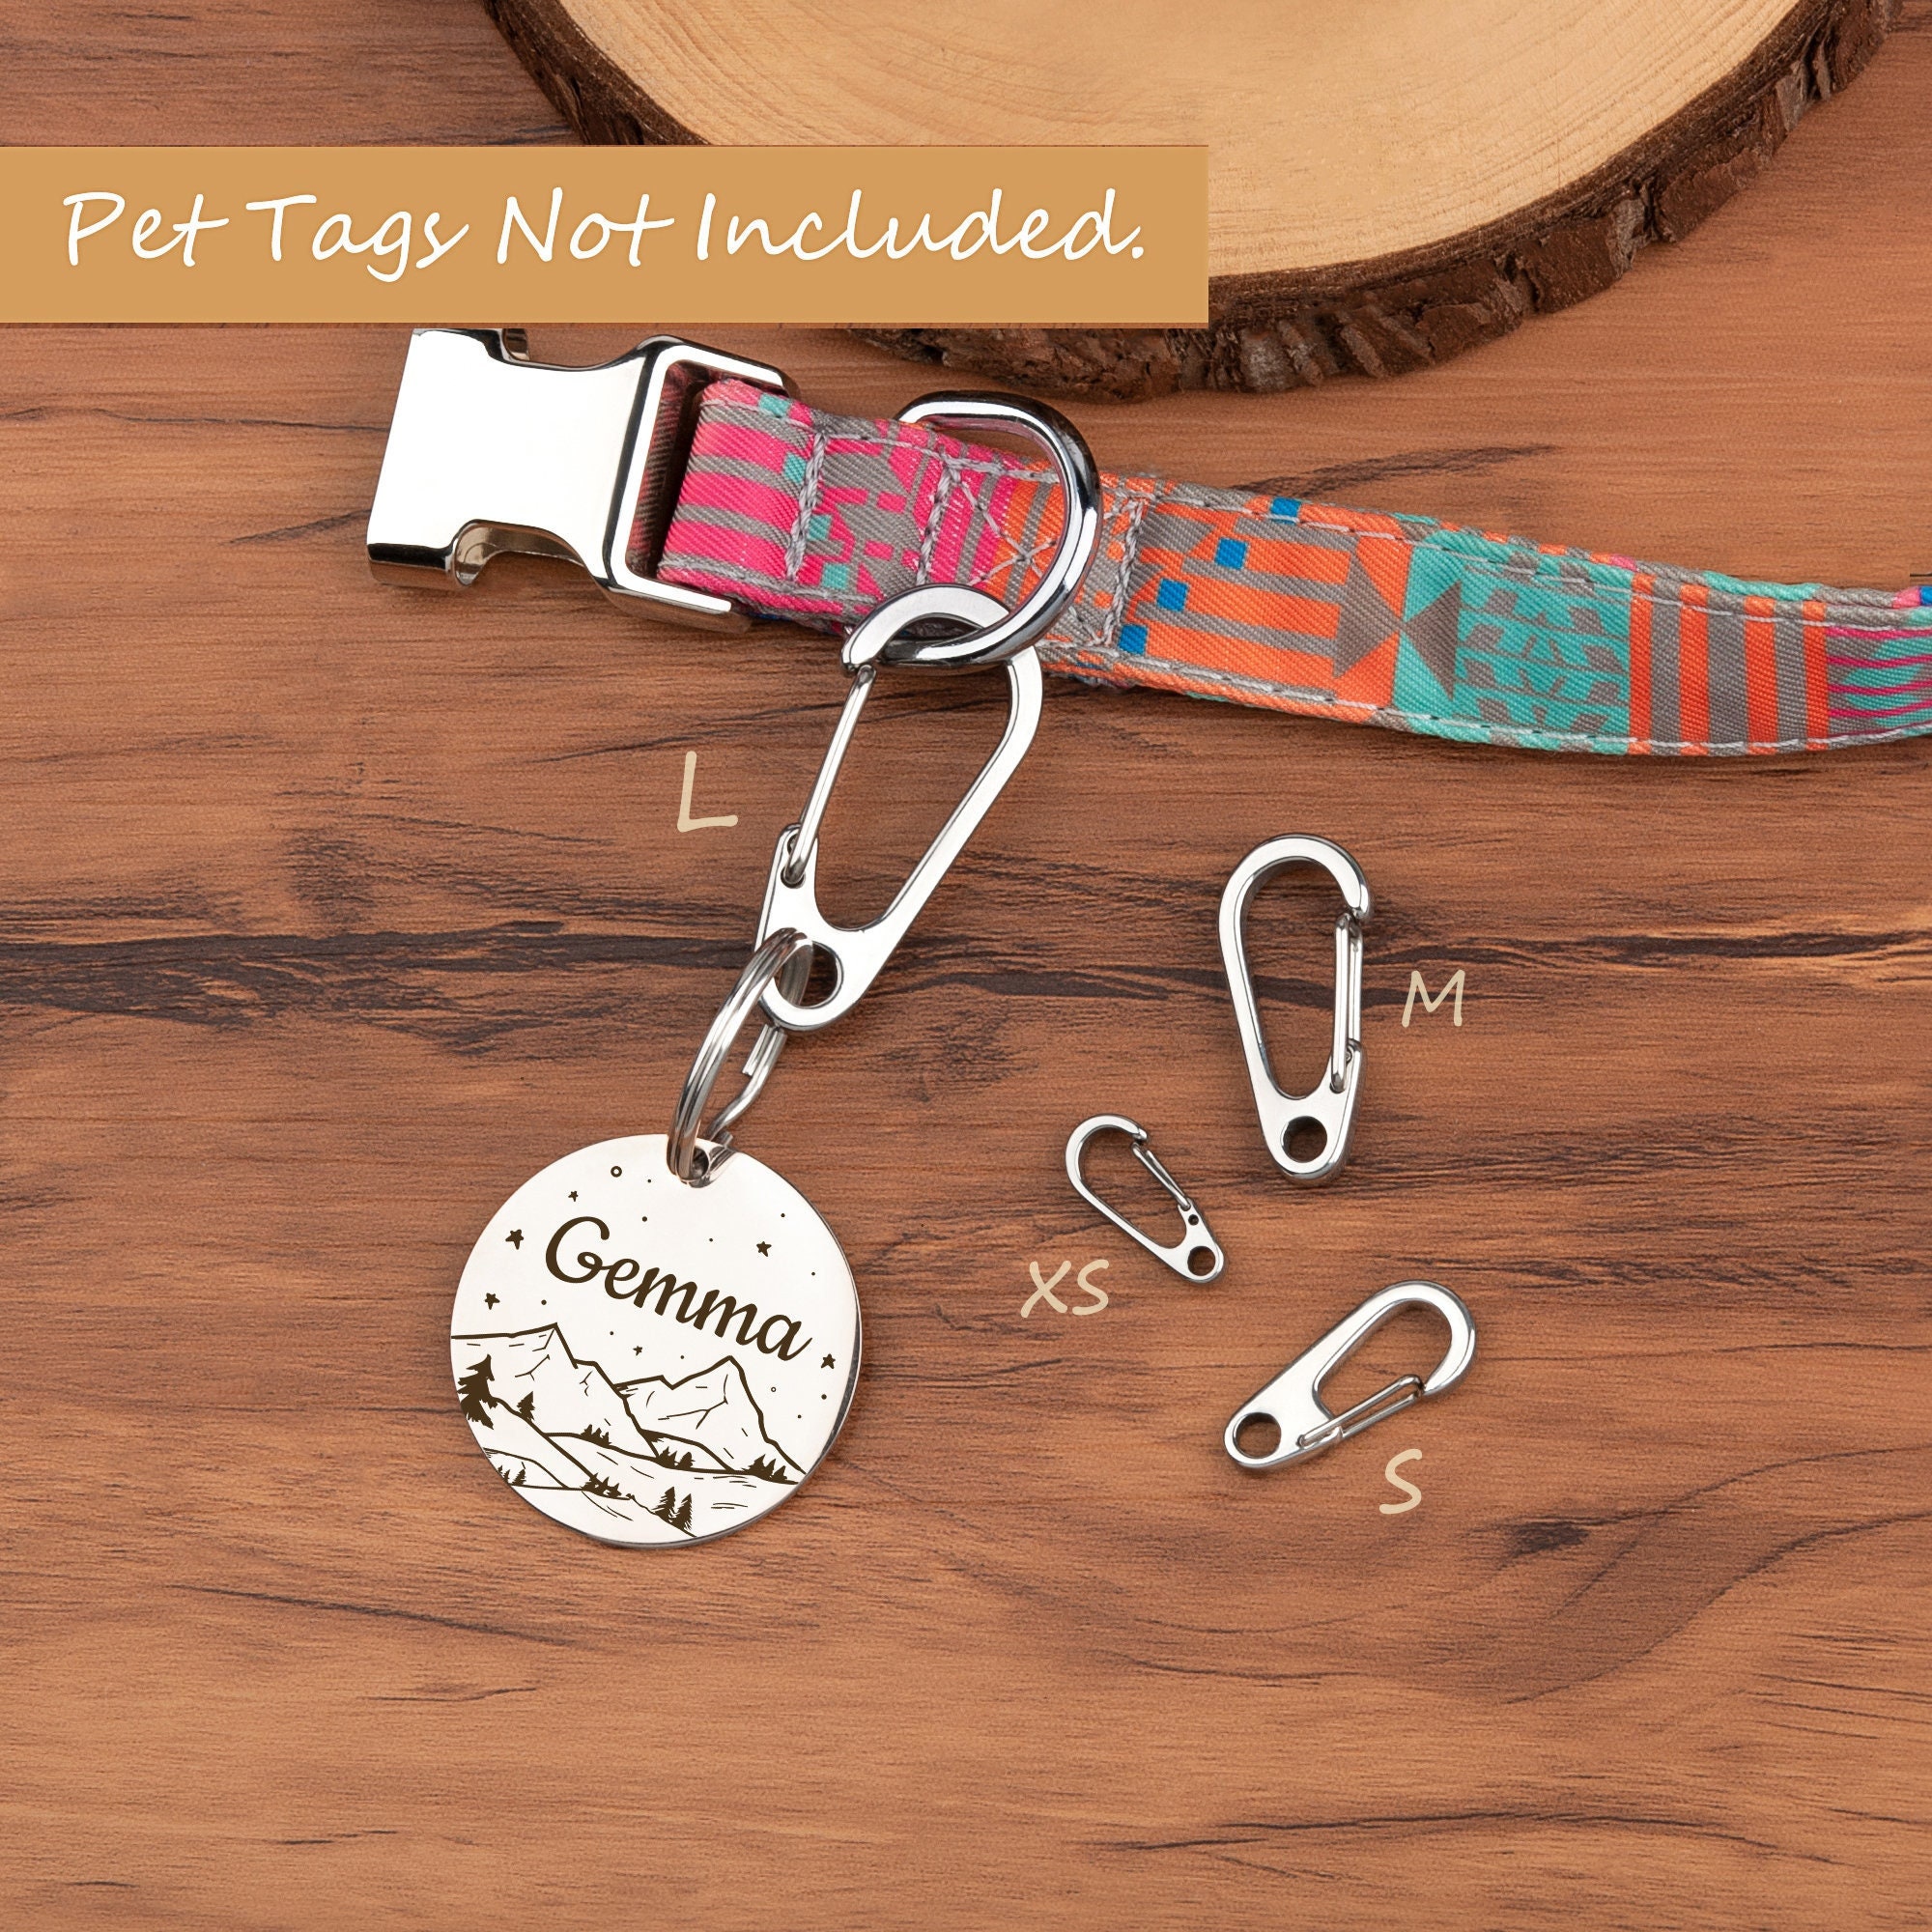 ADD-ON / UPGRADE Mini Tag Ring for Any Collar or Harness Purchase